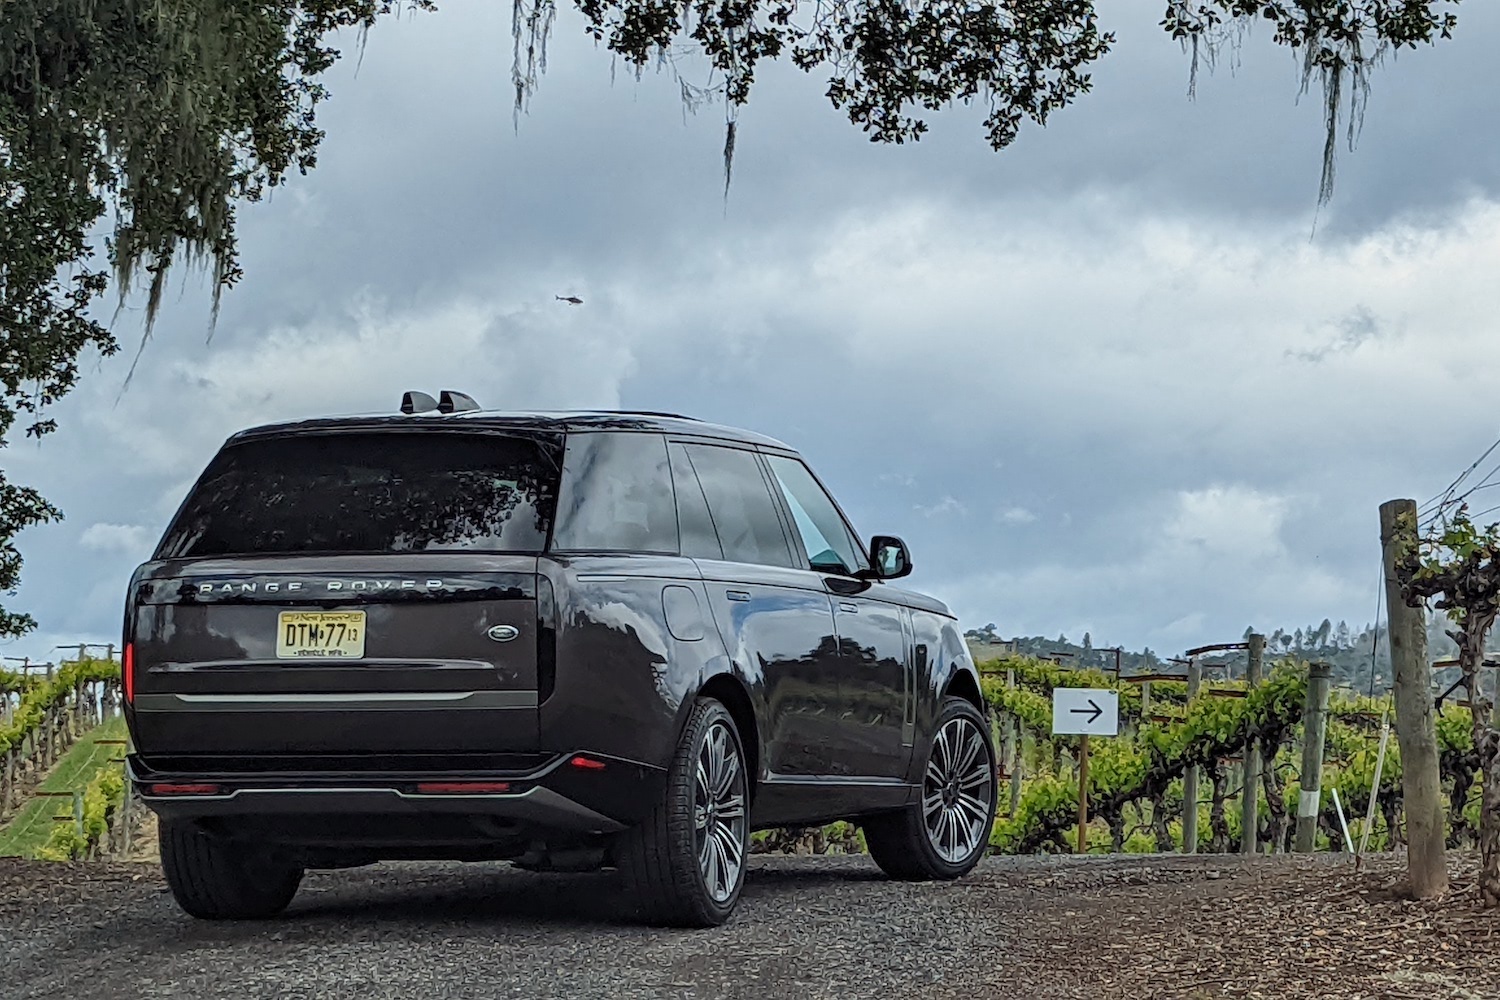 The Range Rover P400 at Robert Young Estate Winery in Napa.